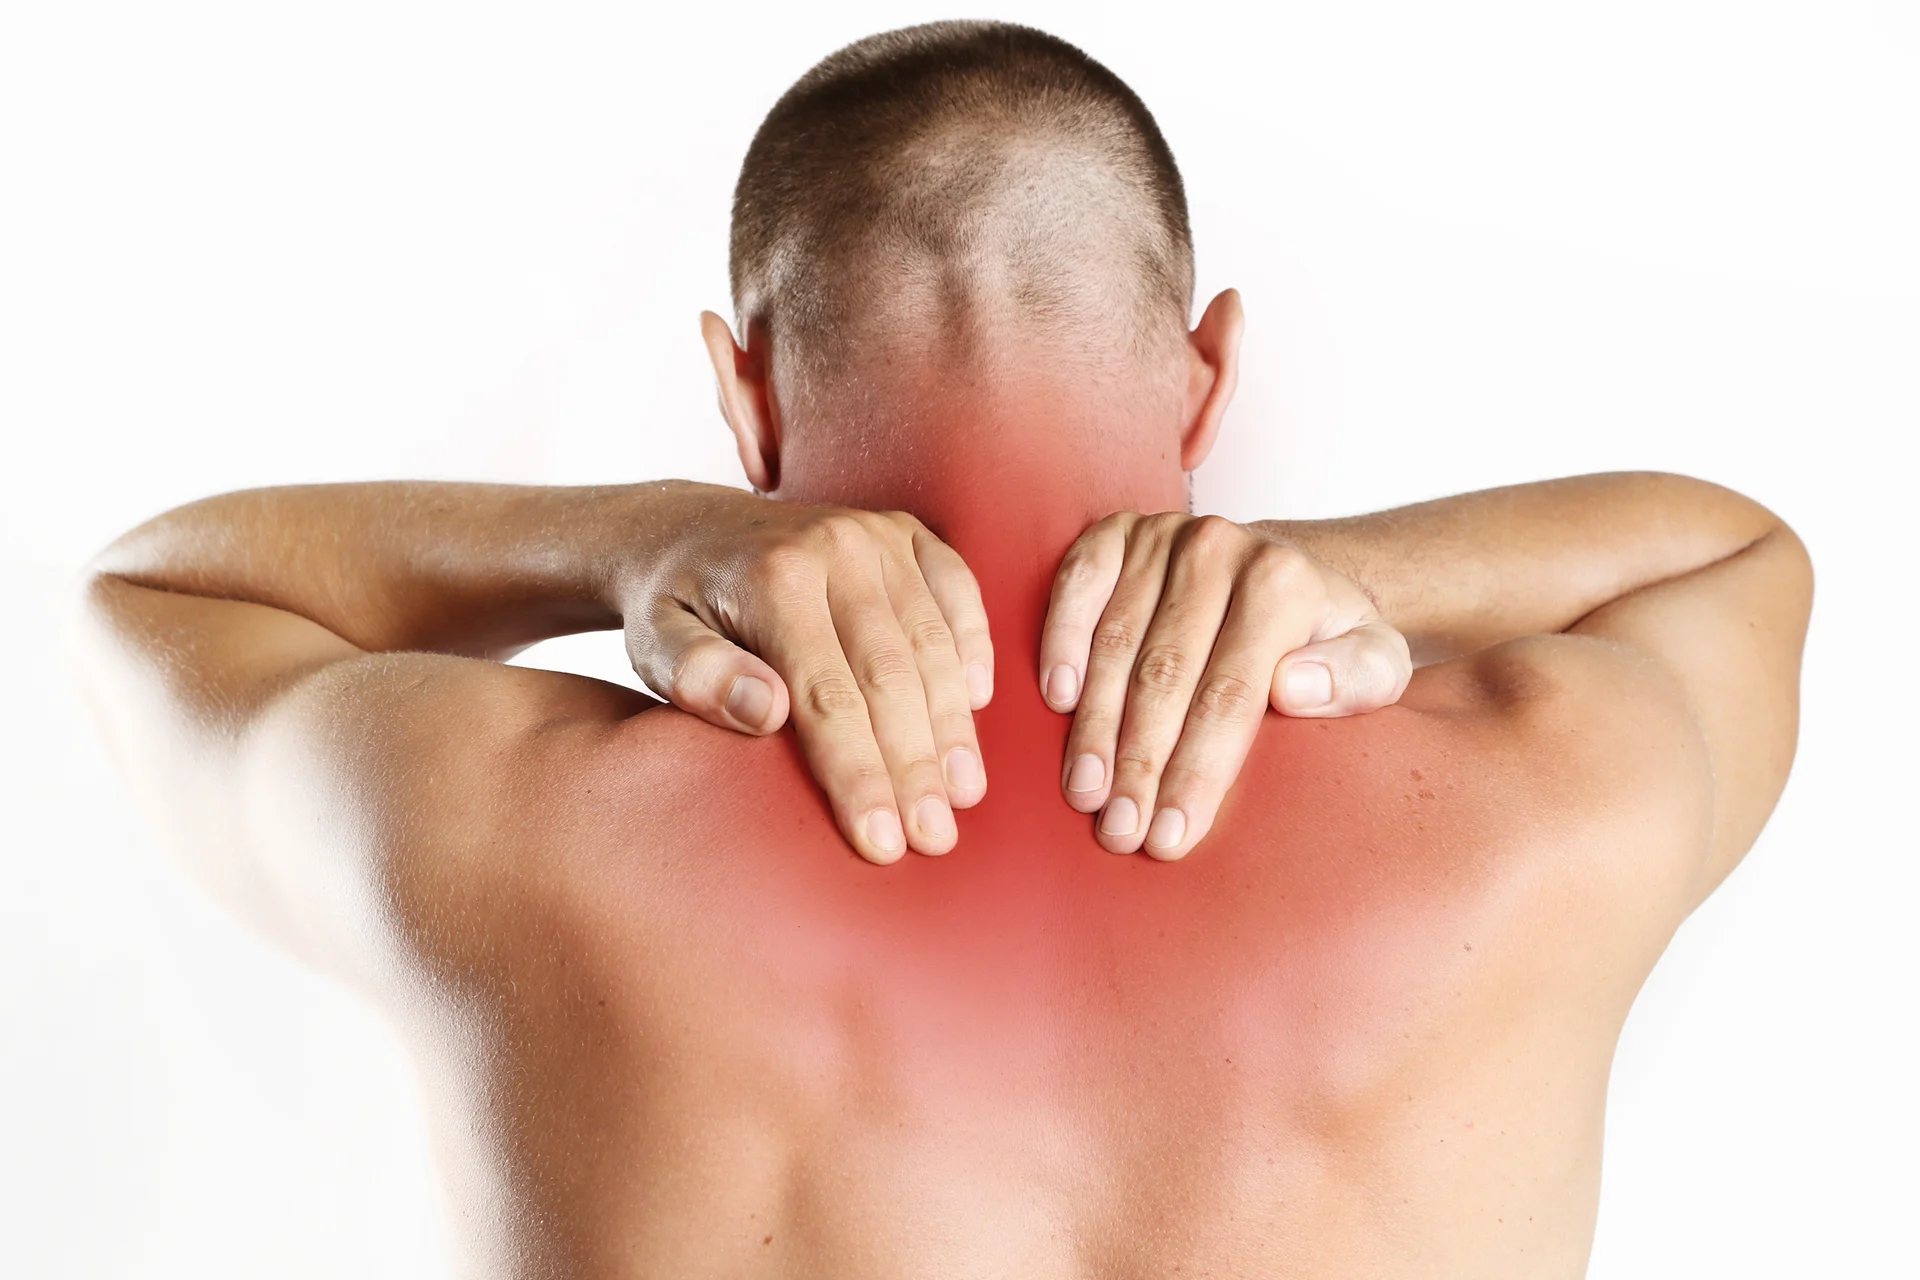 https://www.gramercypaincenter.com/wp-content/uploads/2022/12/what-are-the-7-pressure-points-for-upper-back-pain-relief-featured.webp